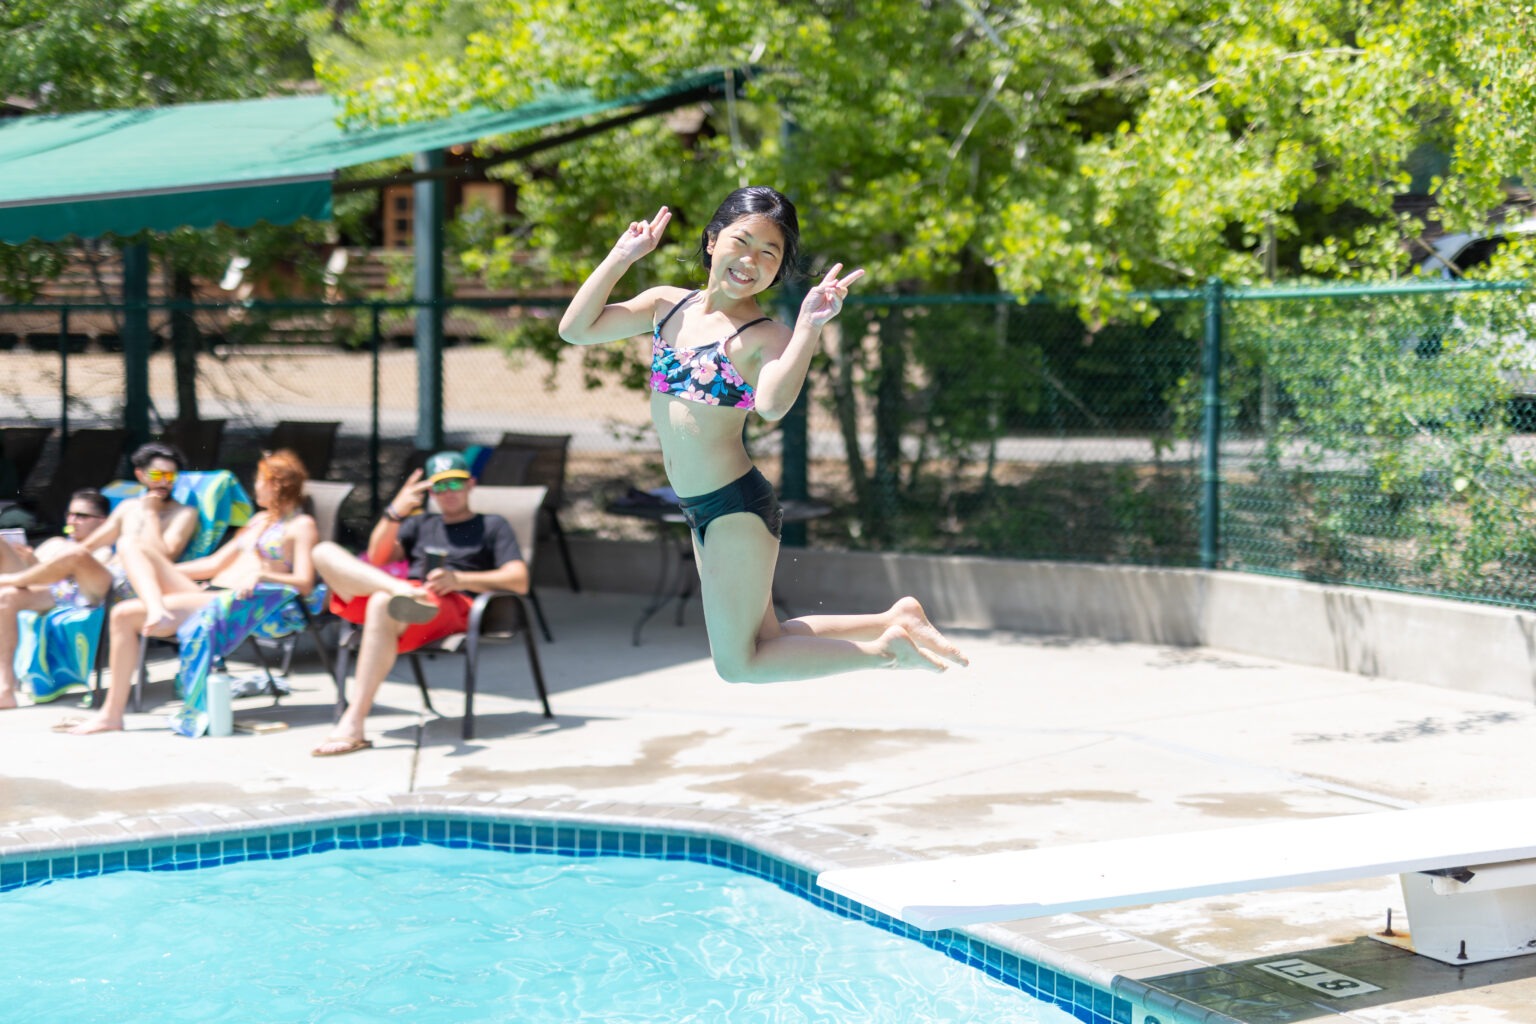 young girl jumping off the diving board smiling at the camera and putting up peace sign fingers